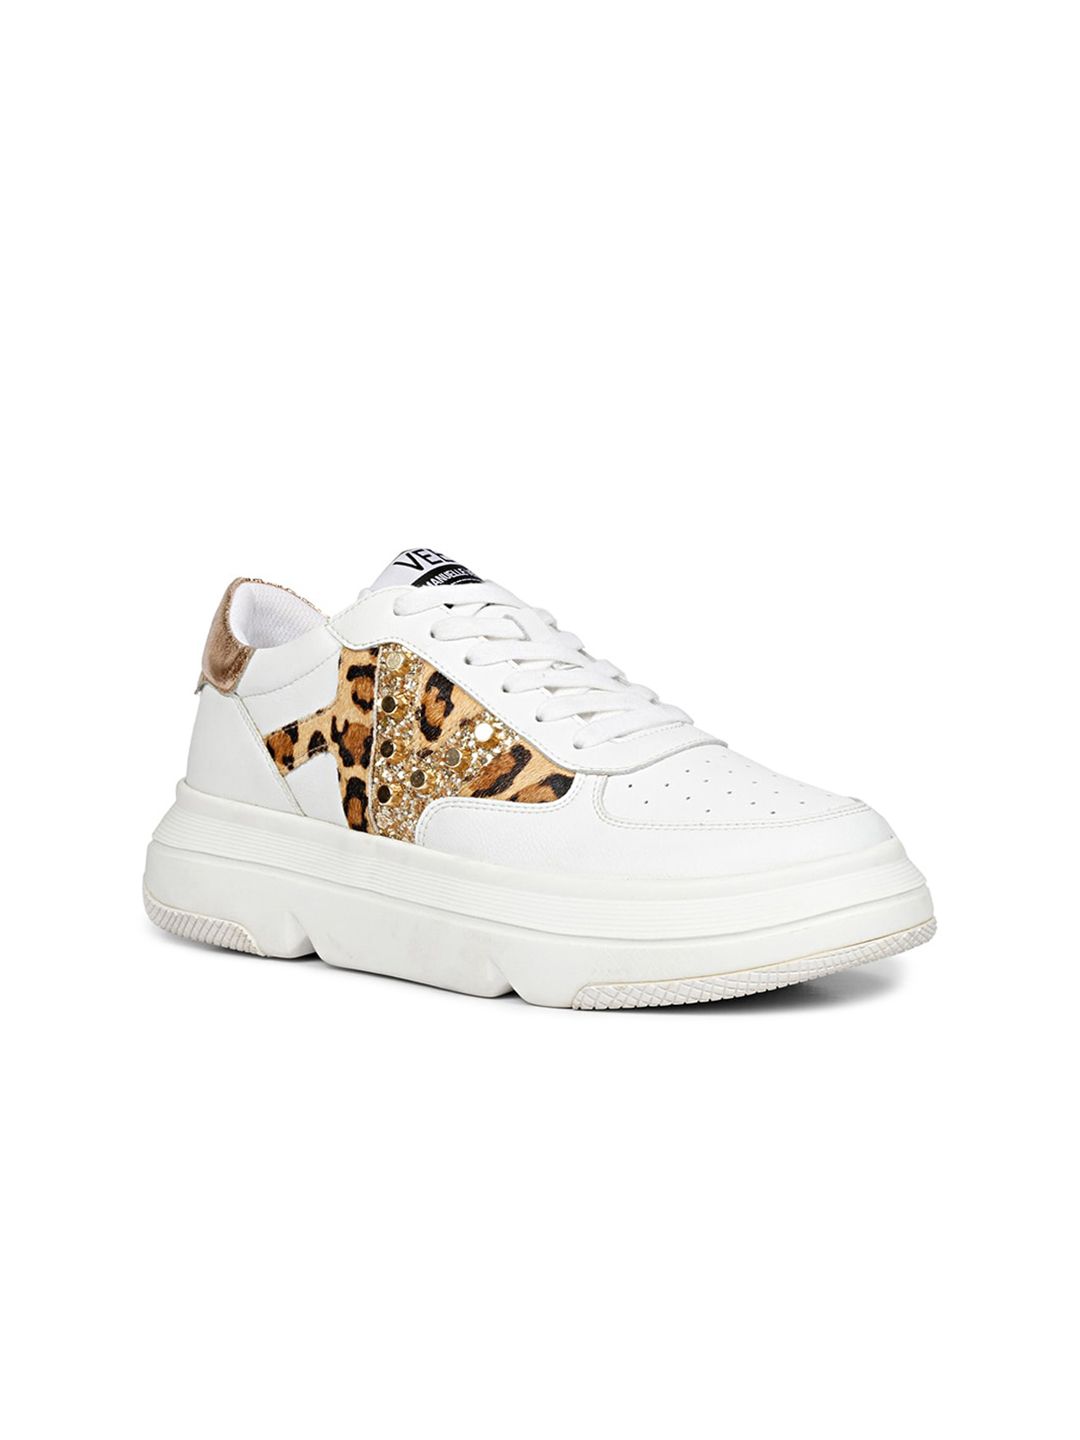 Saint G Women Printed Embellished Genuine Leather Sneakers Price in India